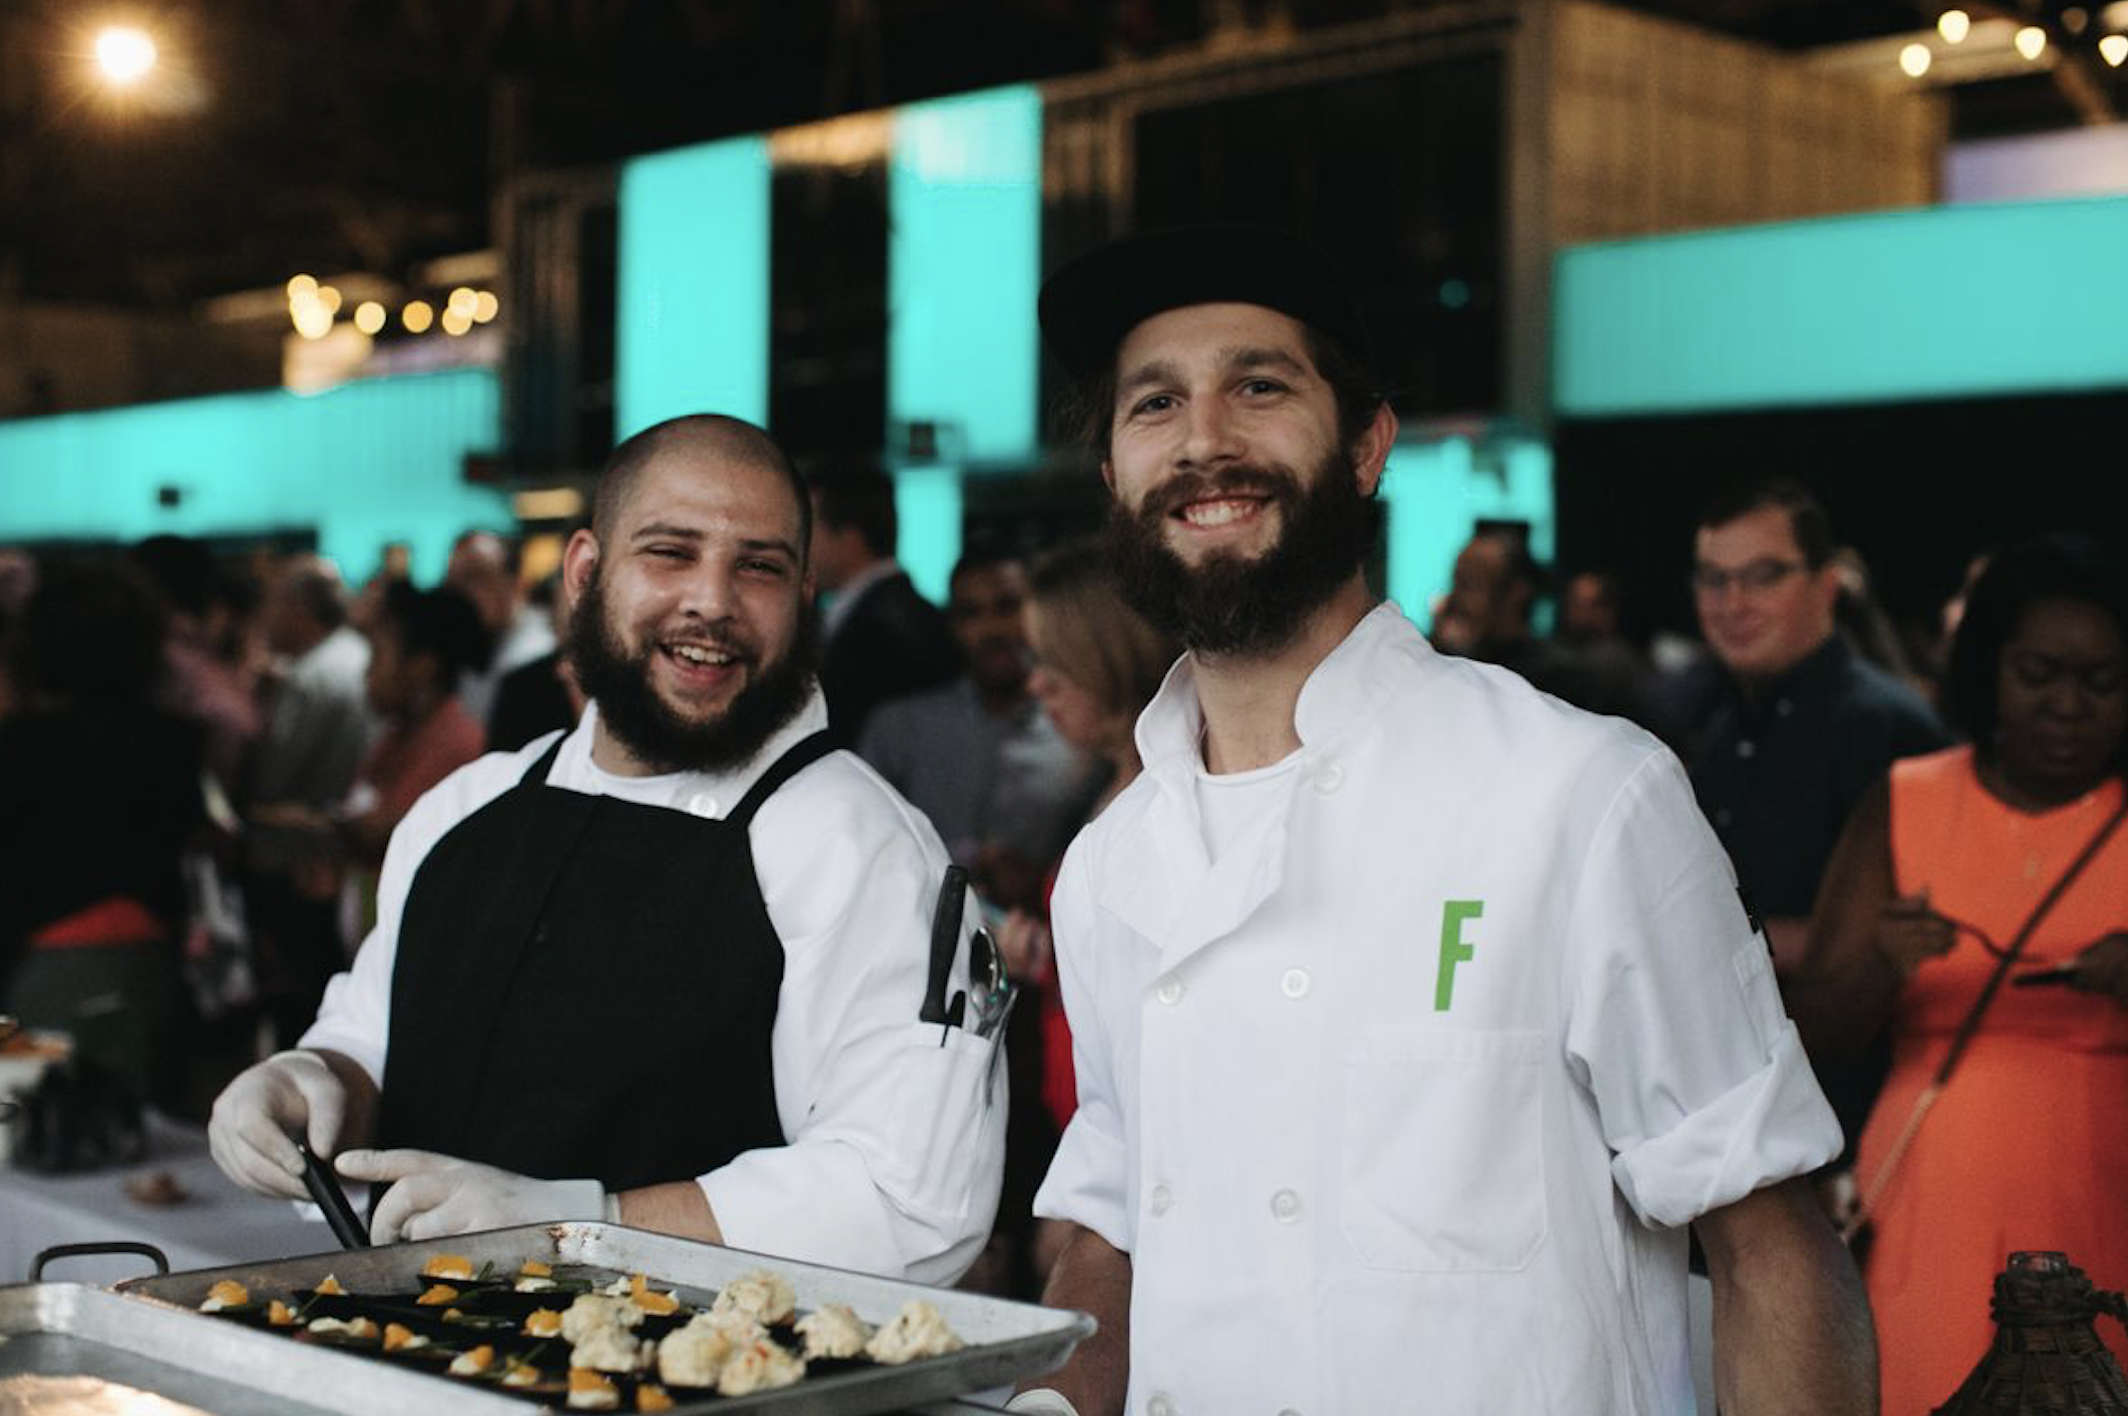 Two chefs standing next to each other serving dumplings at Feastival.